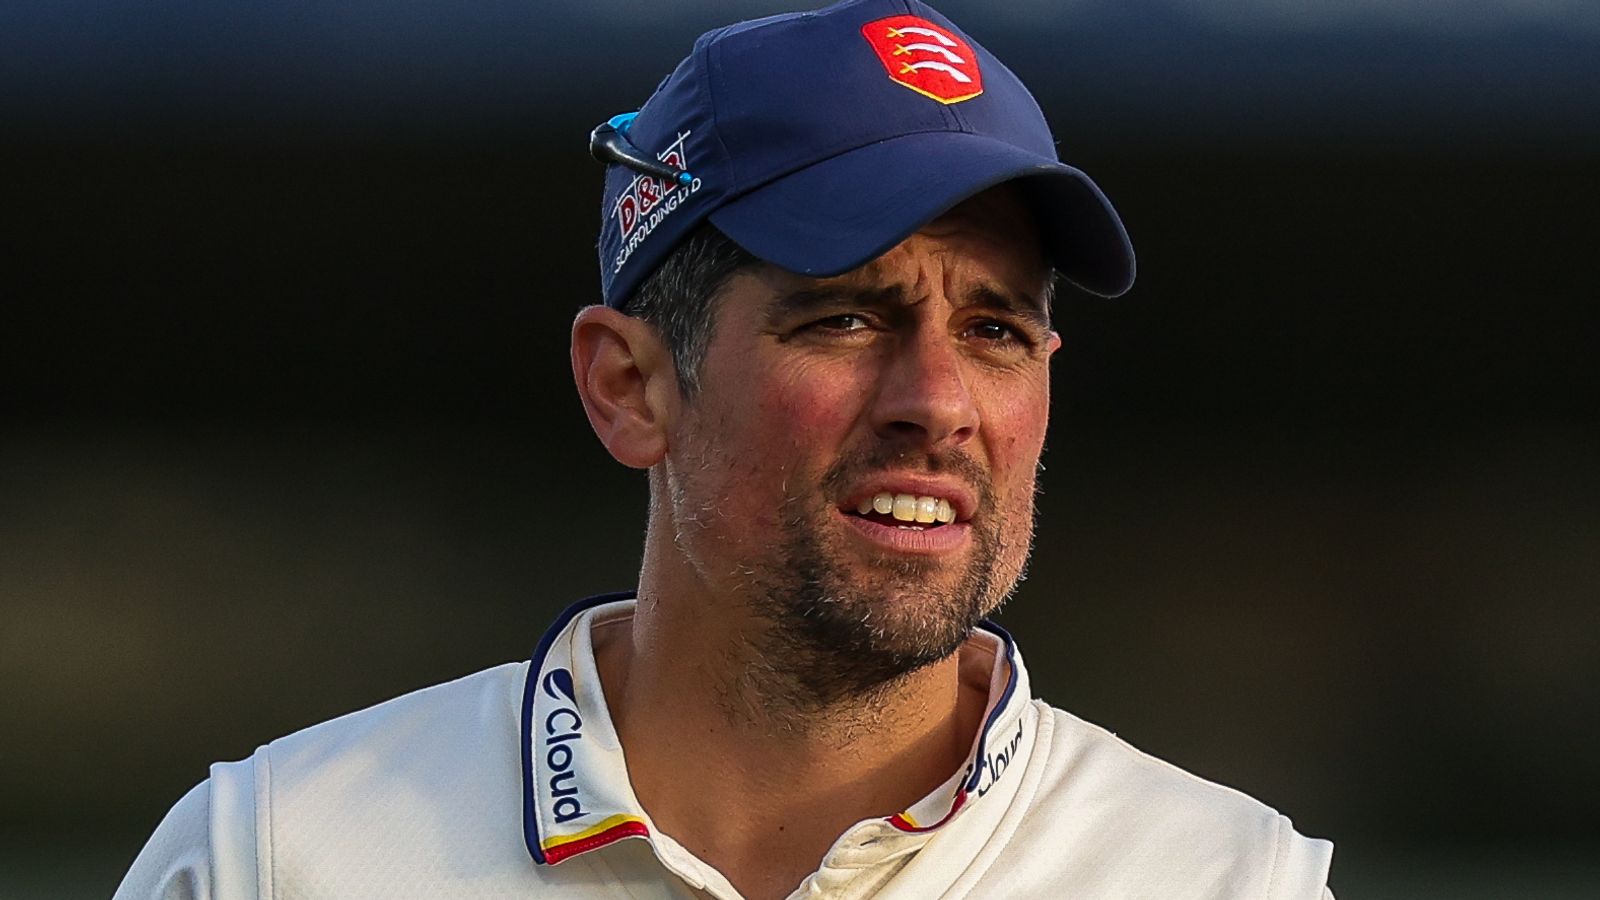 Alastair Cook: Former England captain retires from cricket as country’s record Test run-scorer | Cricket News